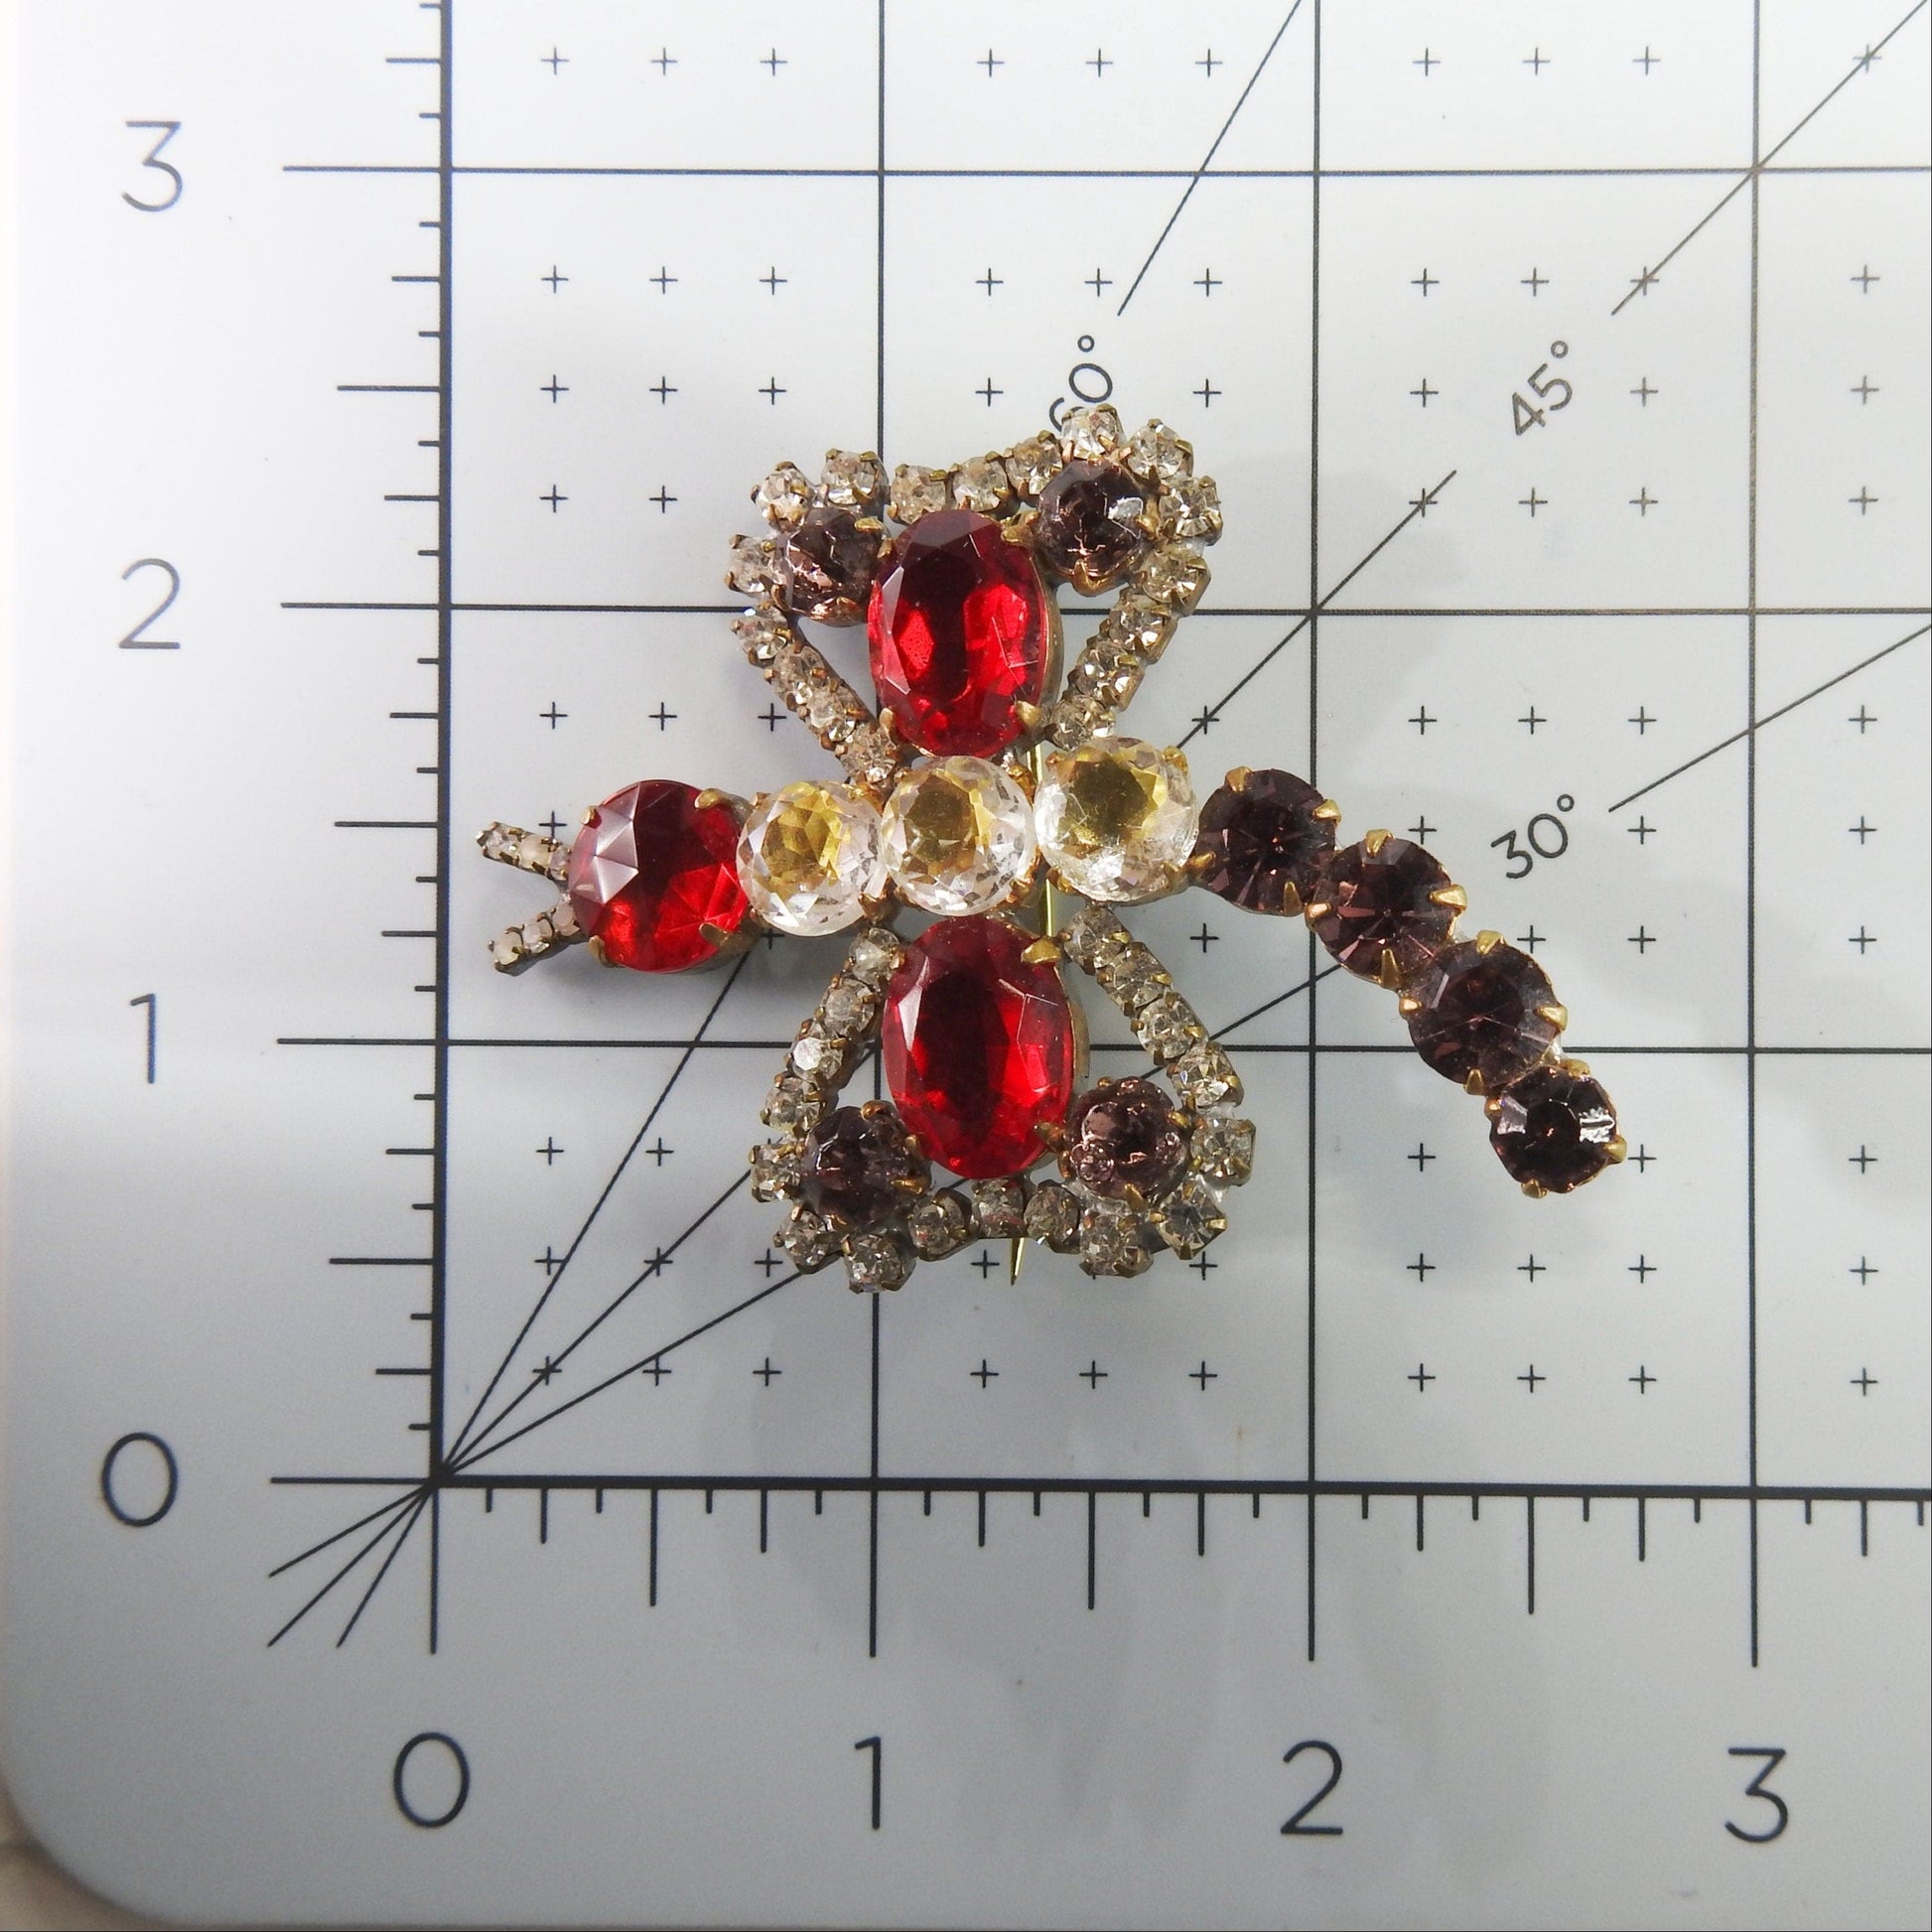 Exquisite Czech Glass Dragonfly Brooch: Luminous Rhinestones. Elegance for Fashionable Women. 50x40mm, Silver & Gold Tones. Gift for her.